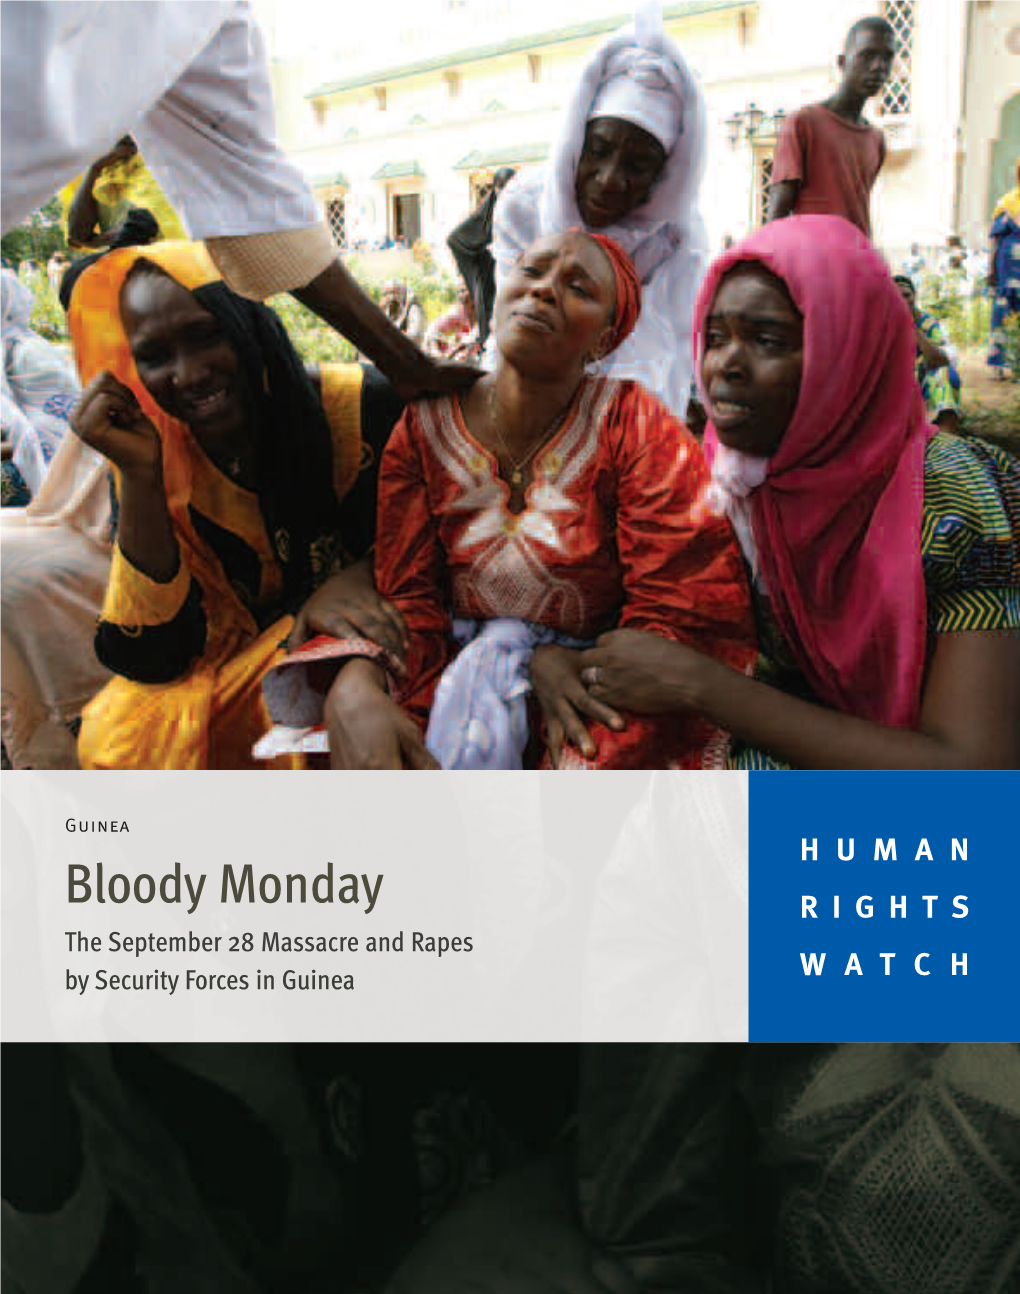 Bloody Monday – the September 28 Massacre and Rapes by Security